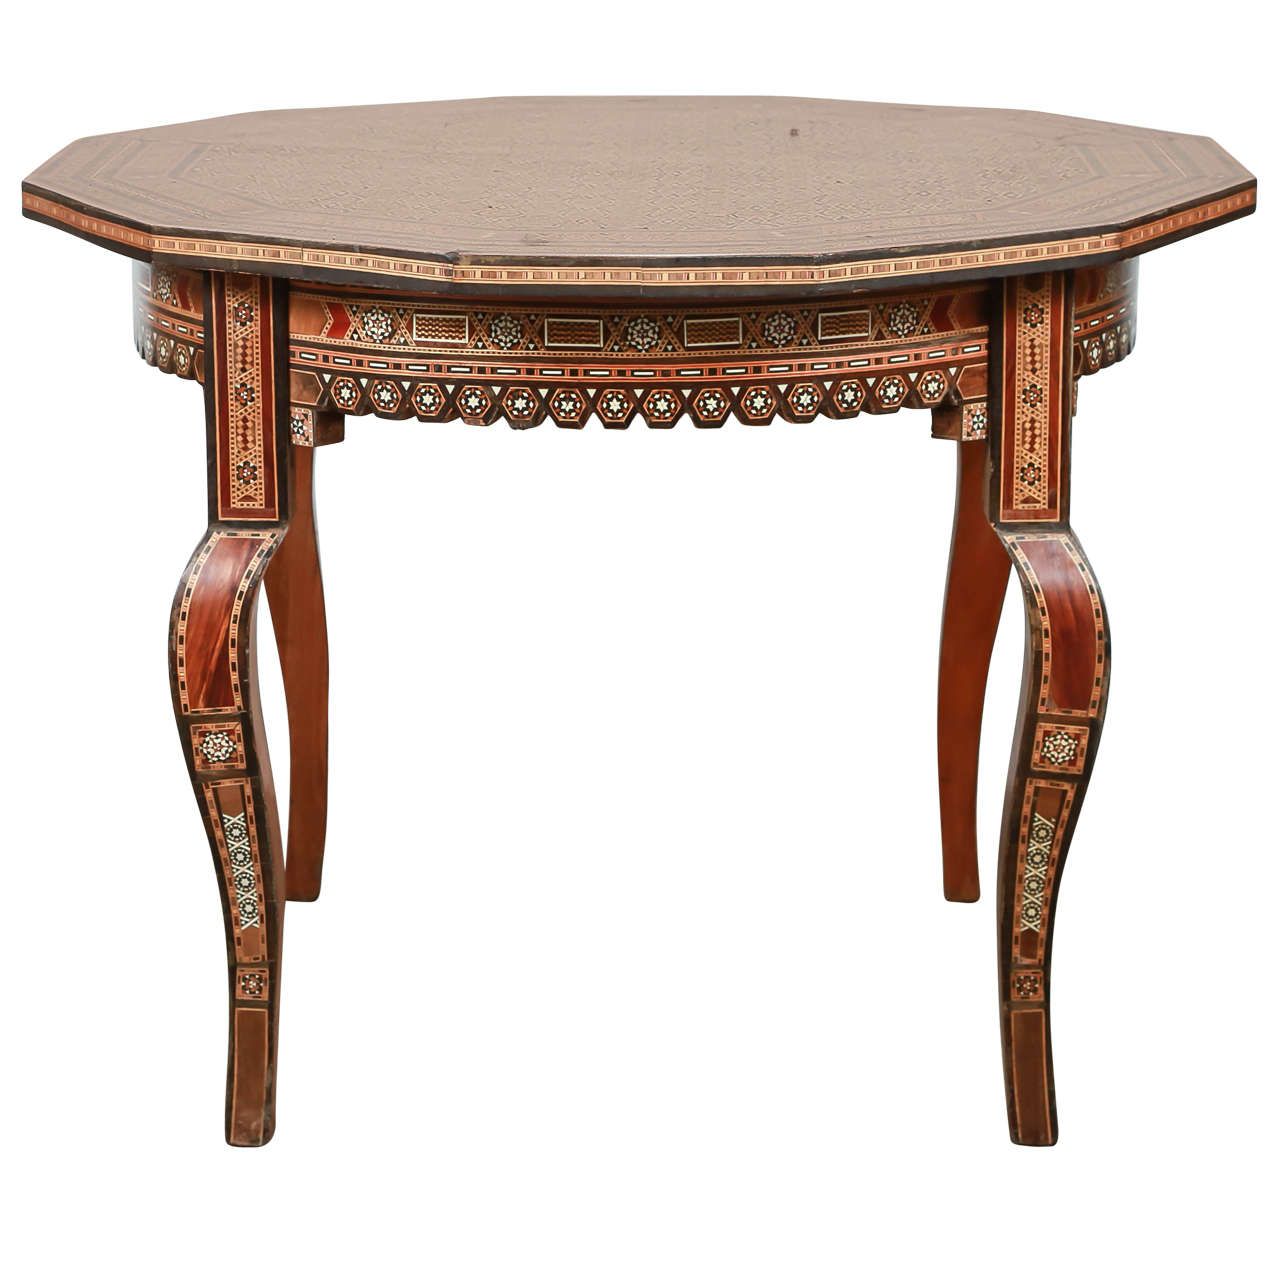 Inlaid Syrian Octagonal Side Coffee Table At 1stdibs Regarding Fashionable Octagon Coffee Tables (Gallery 13 of 20)